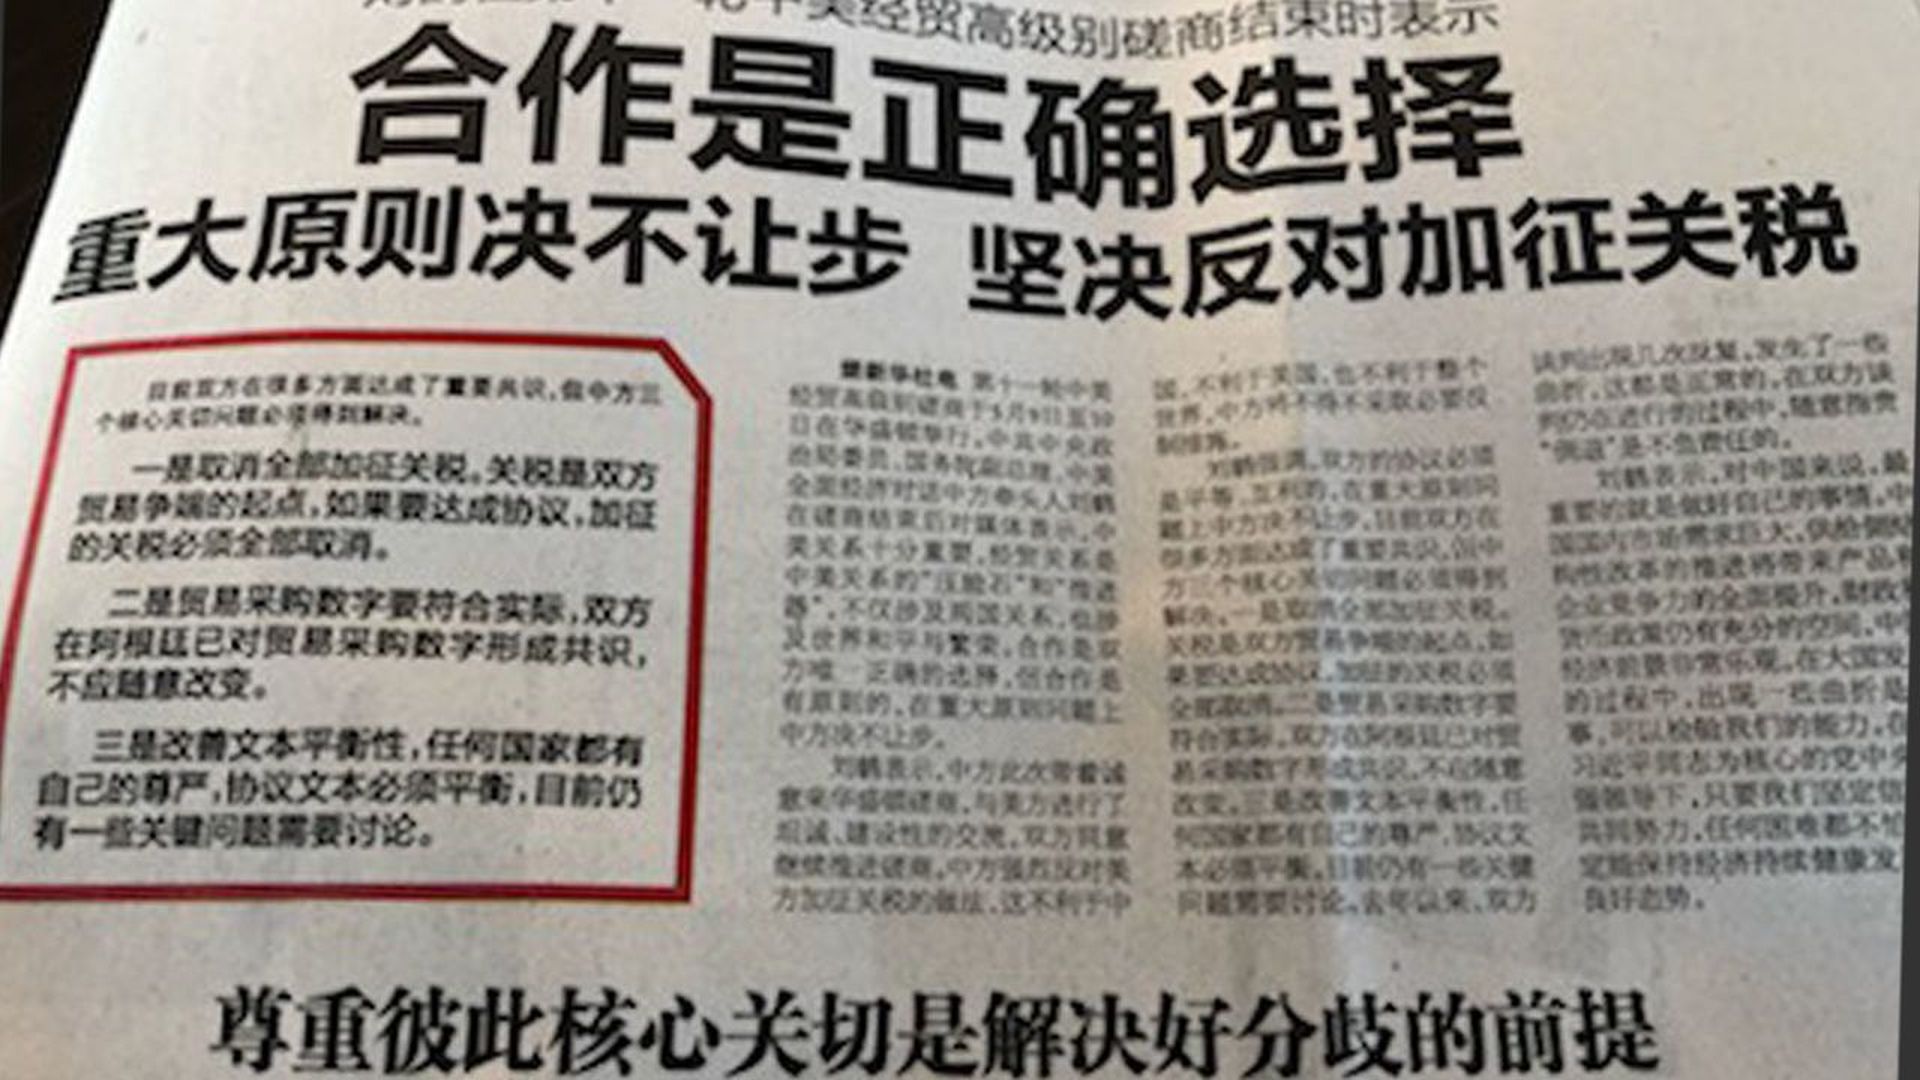 The Chengdu Commercial Daily, in the capital of Sichuan Province. (Photo courtesy Kevin Rudd)